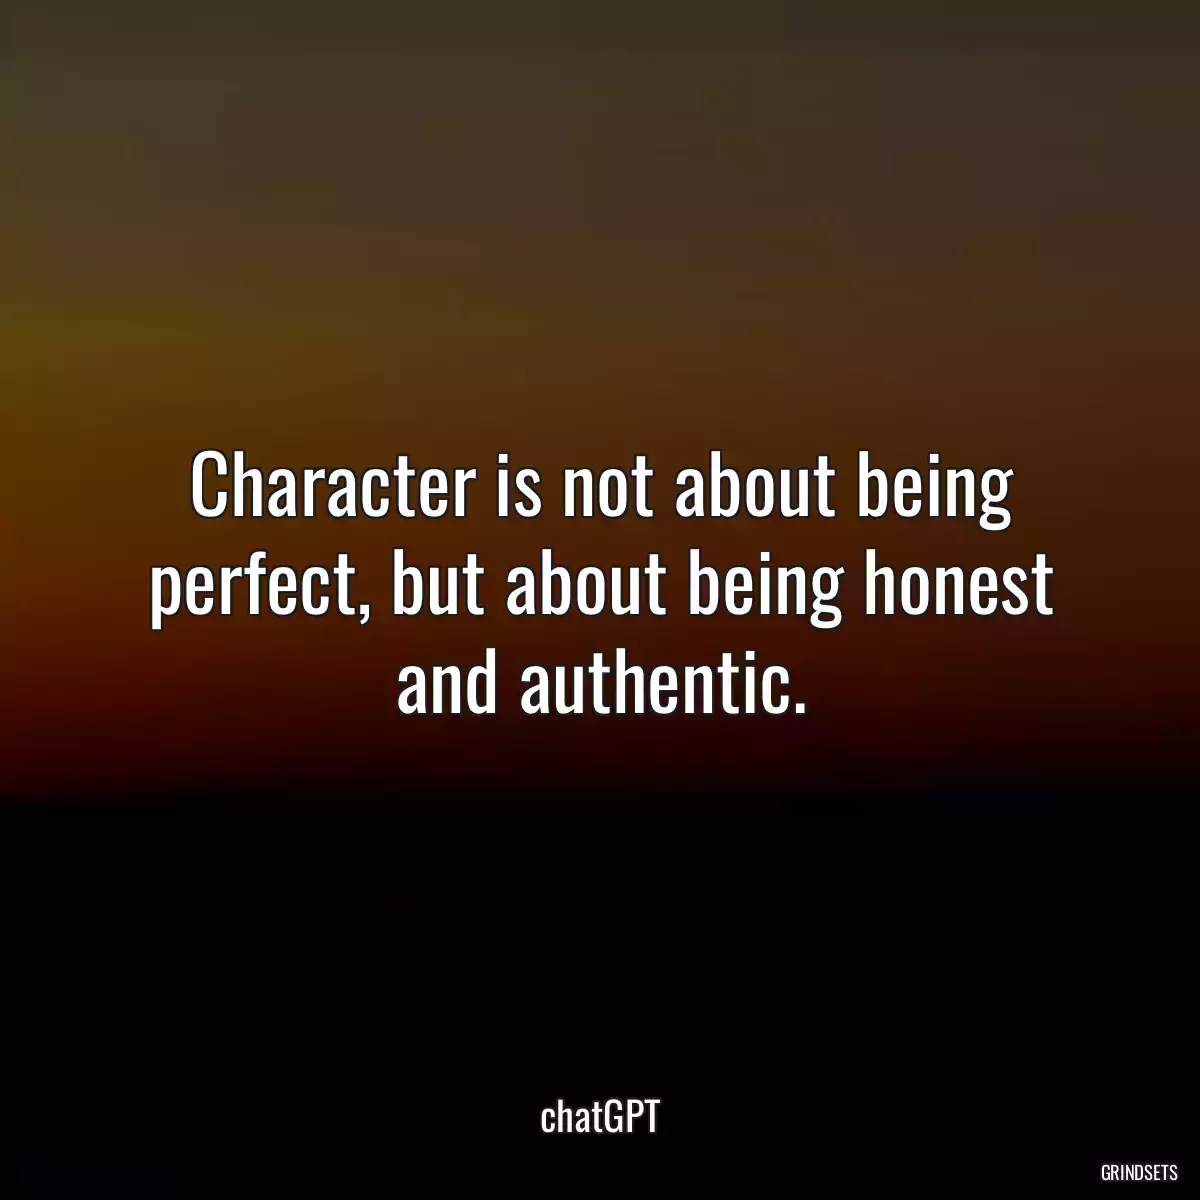 Character is not about being perfect, but about being honest and authentic.